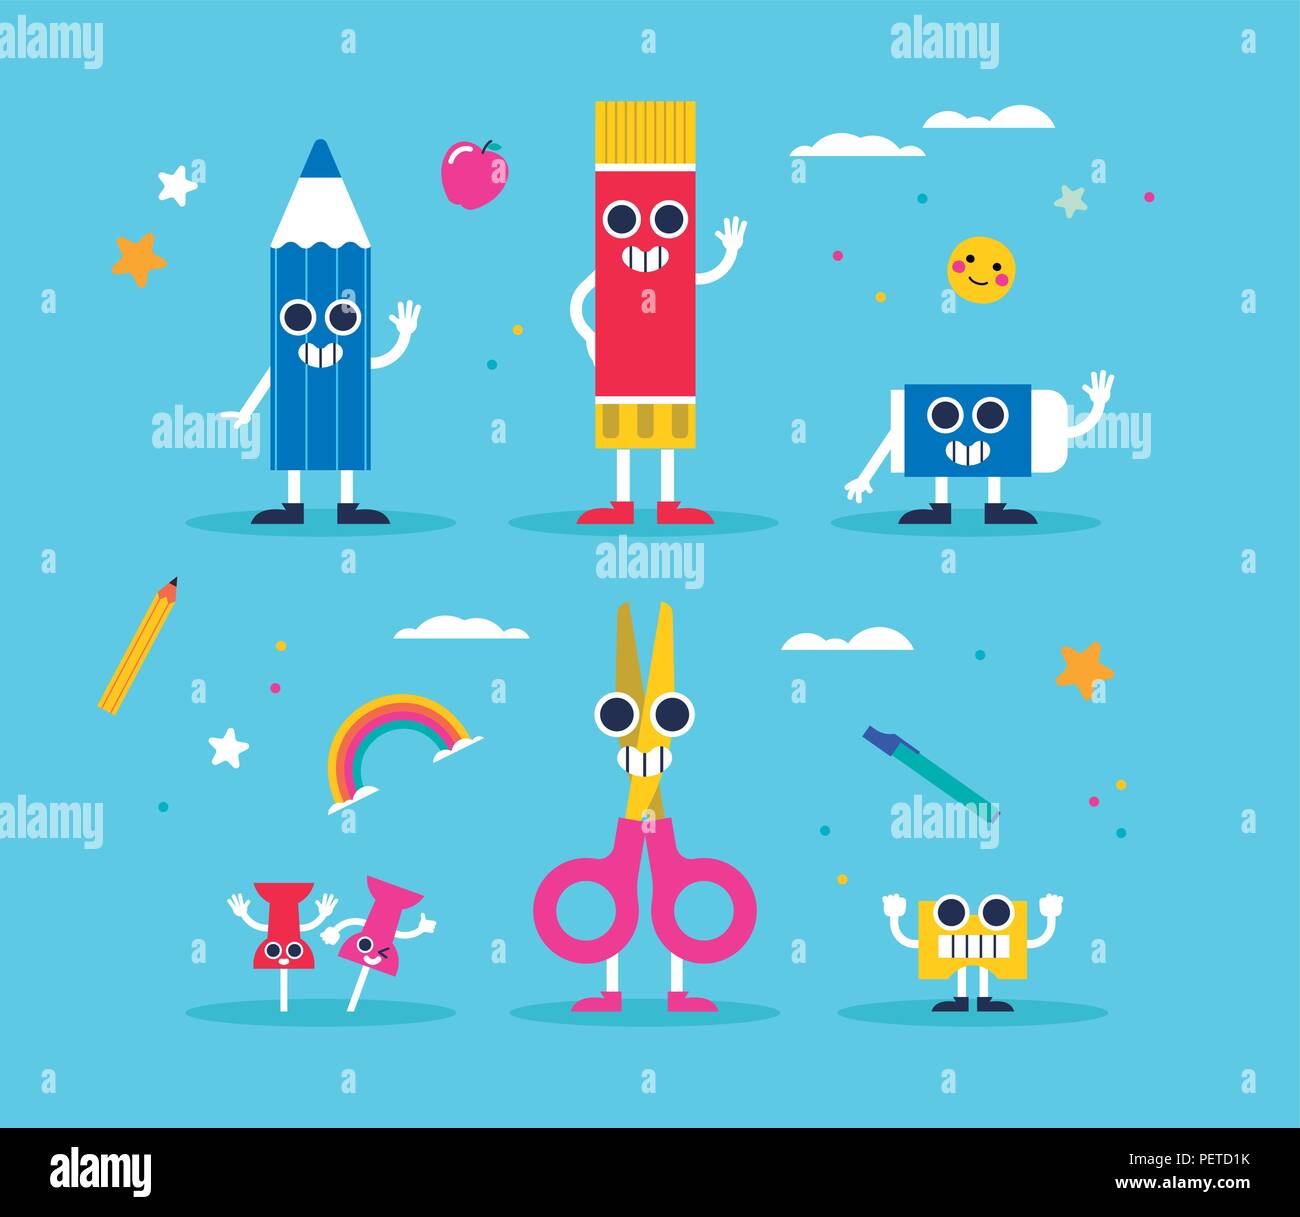 School supply character set. Includes color pencil, glue, scissors, eraser and sharpener. Funny designs in colorful style for class, children nursery  Stock Vector